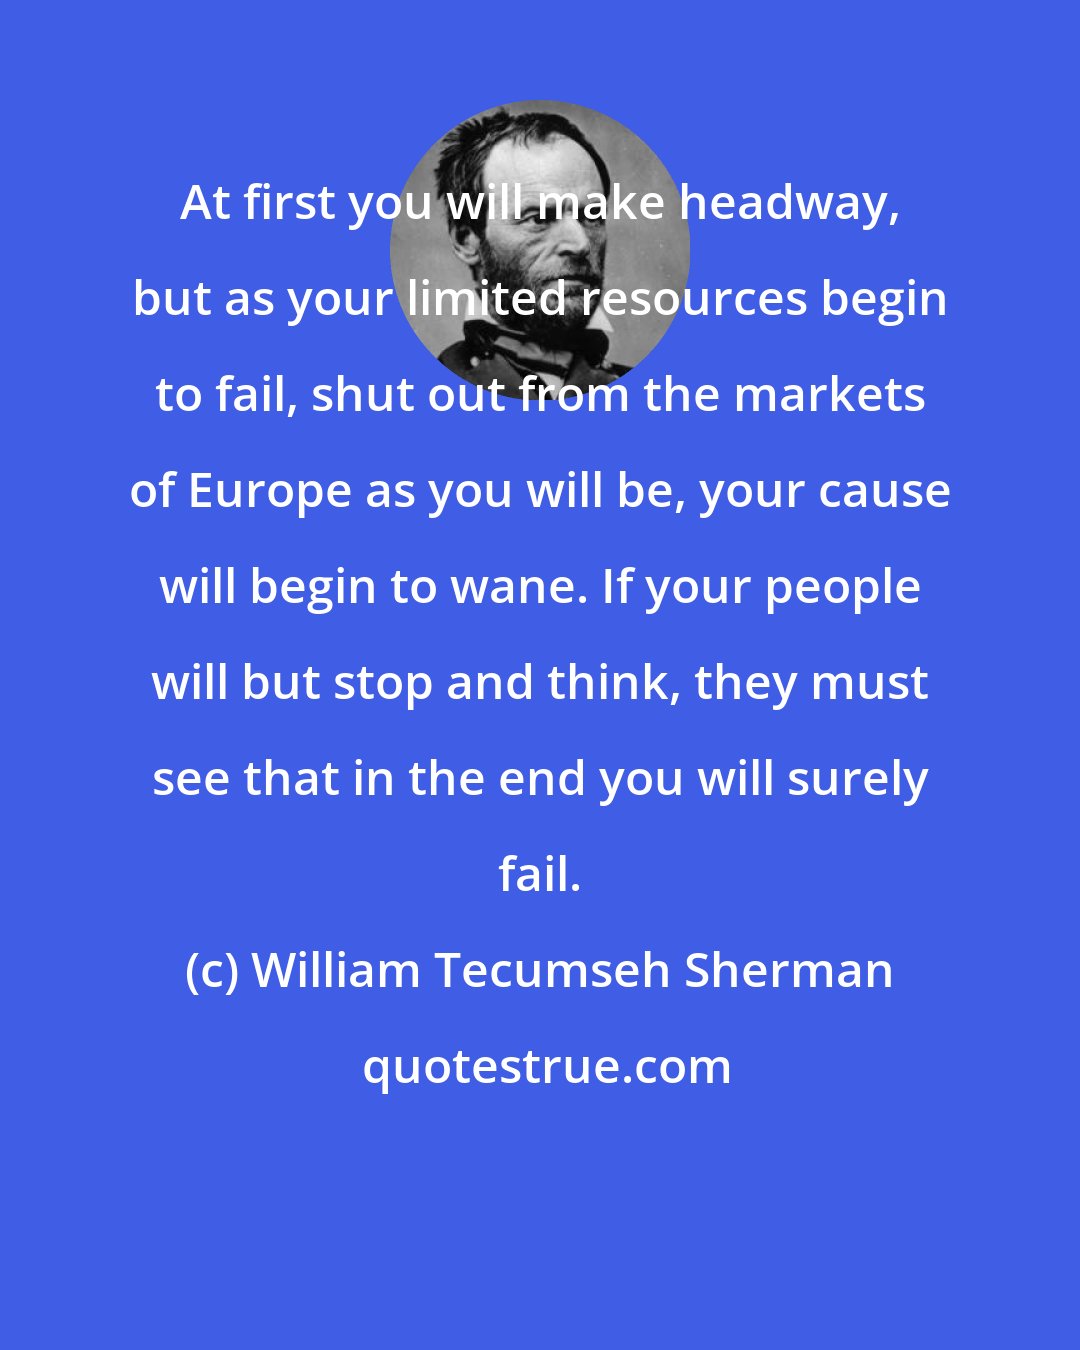 William Tecumseh Sherman: At first you will make headway, but as your limited resources begin to fail, shut out from the markets of Europe as you will be, your cause will begin to wane. If your people will but stop and think, they must see that in the end you will surely fail.